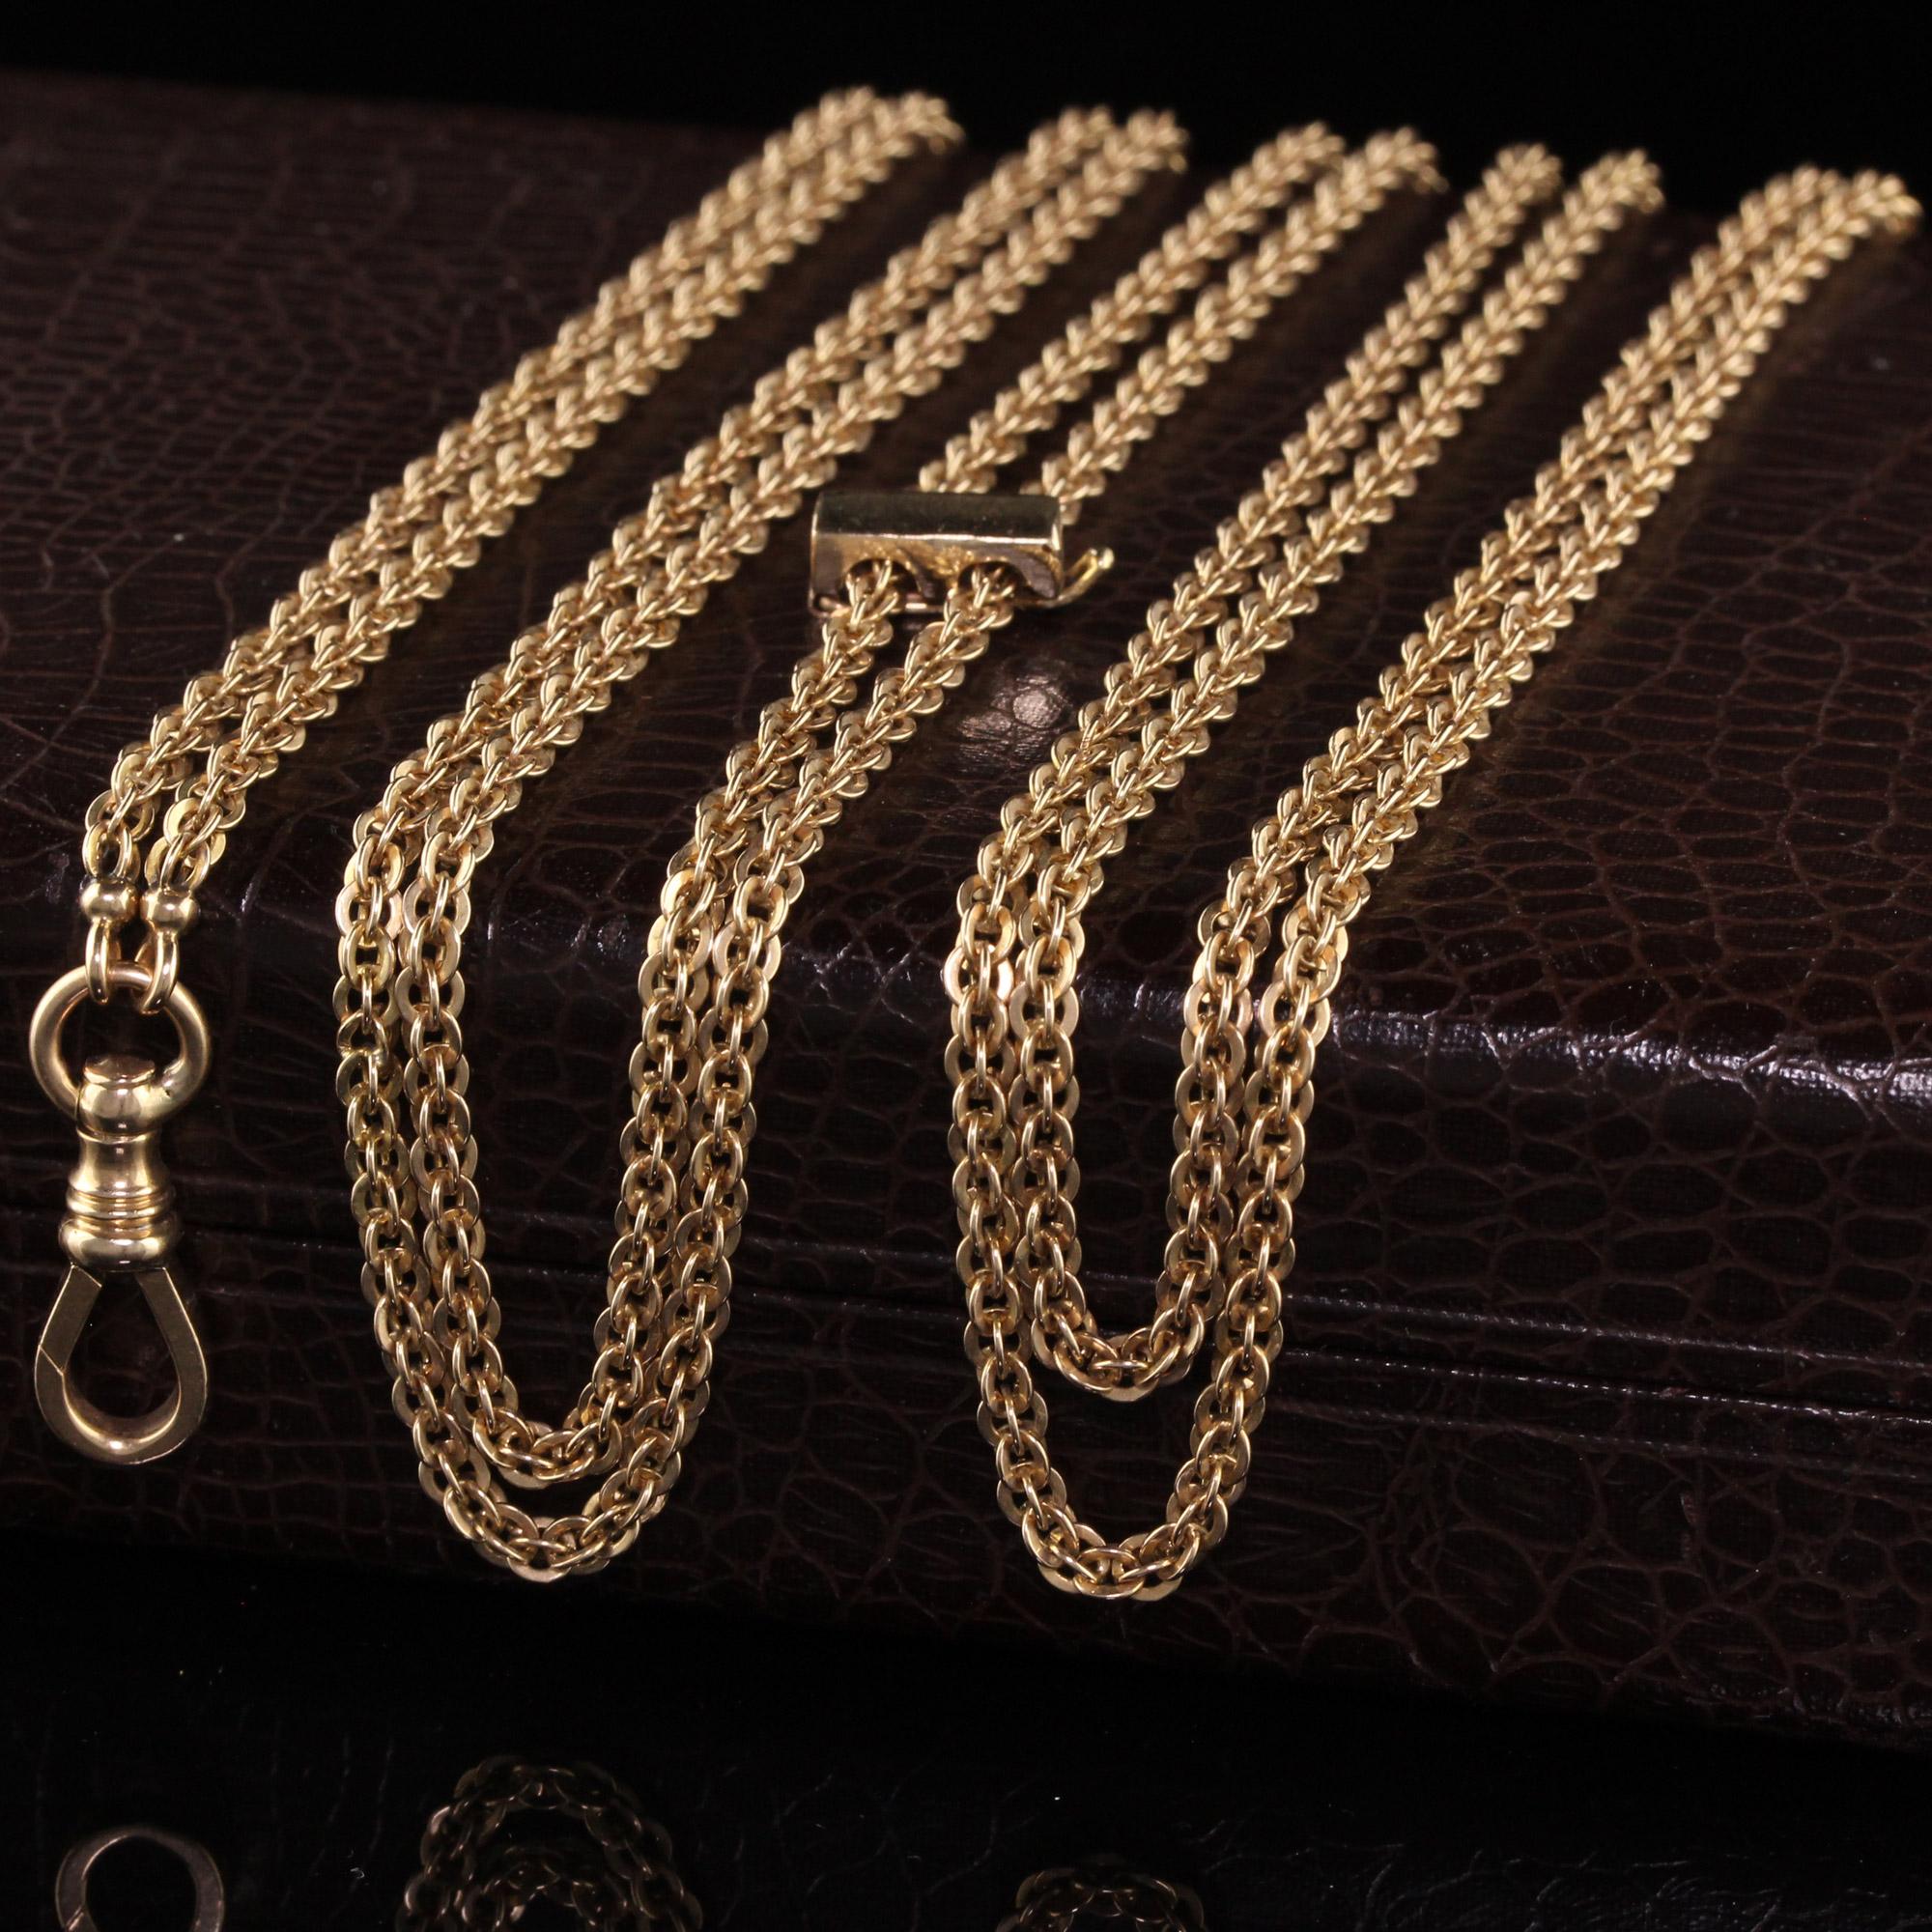 Beautiful Antique Victorian 14K Yellow Gold Cable Link Chain Necklace - 67 Inches. This beautiful cable link necklace is crafted in 14k yellow gold. The necklace measures 67 inches long and is in great condition. There is a gold piece that locks